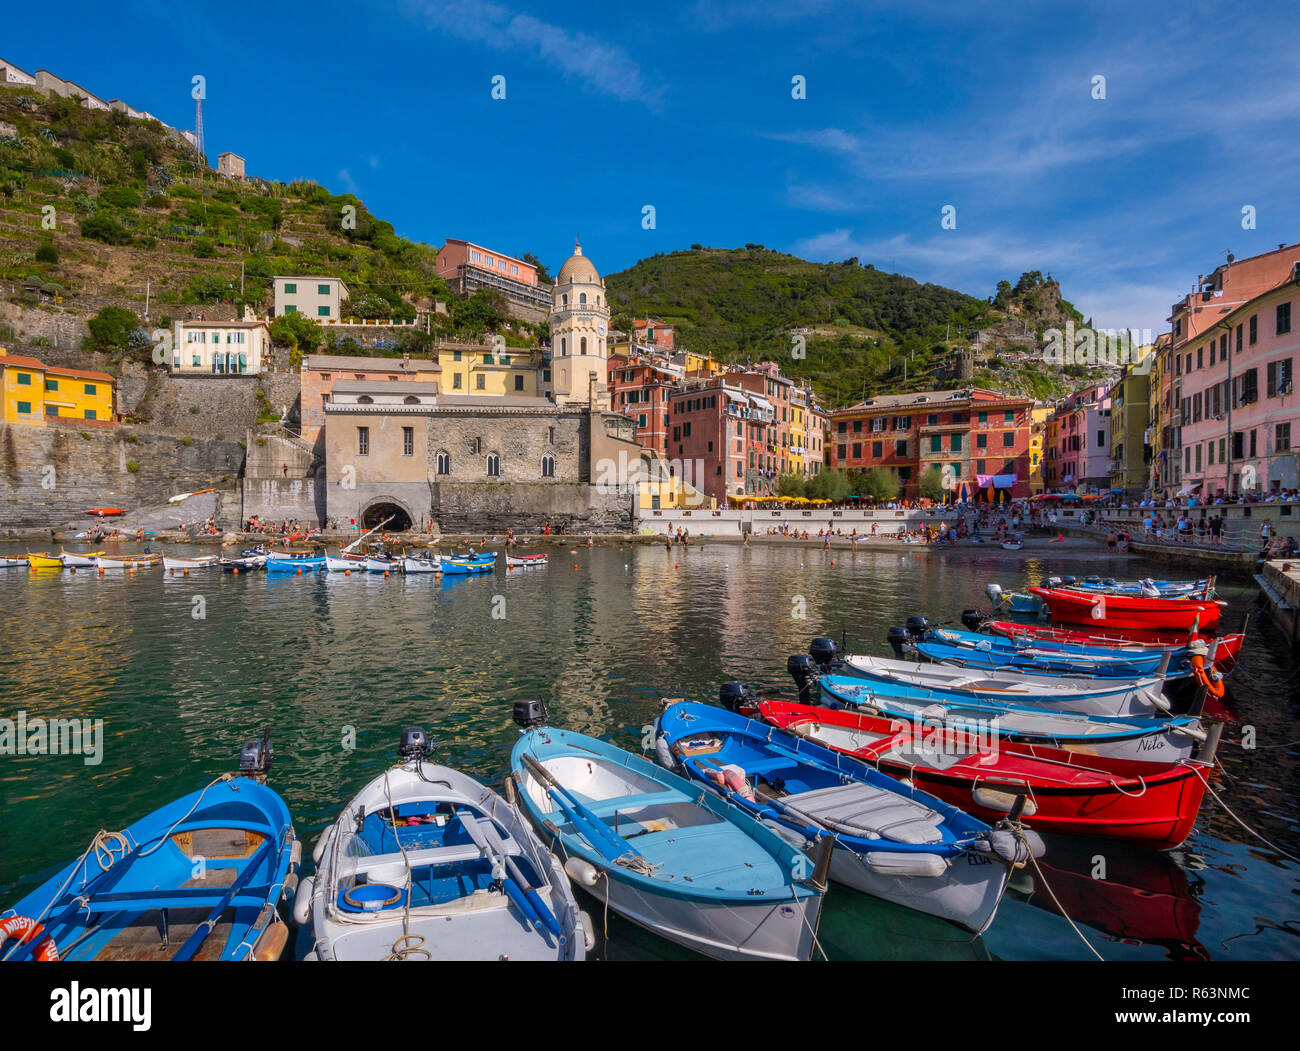 Colourful houses and boats in the fishing port of Vernazza, UNESCO World Heritage Site, Cinque Terre National Park, Vernazza, Liguria, Italy, Europe Stock Photo